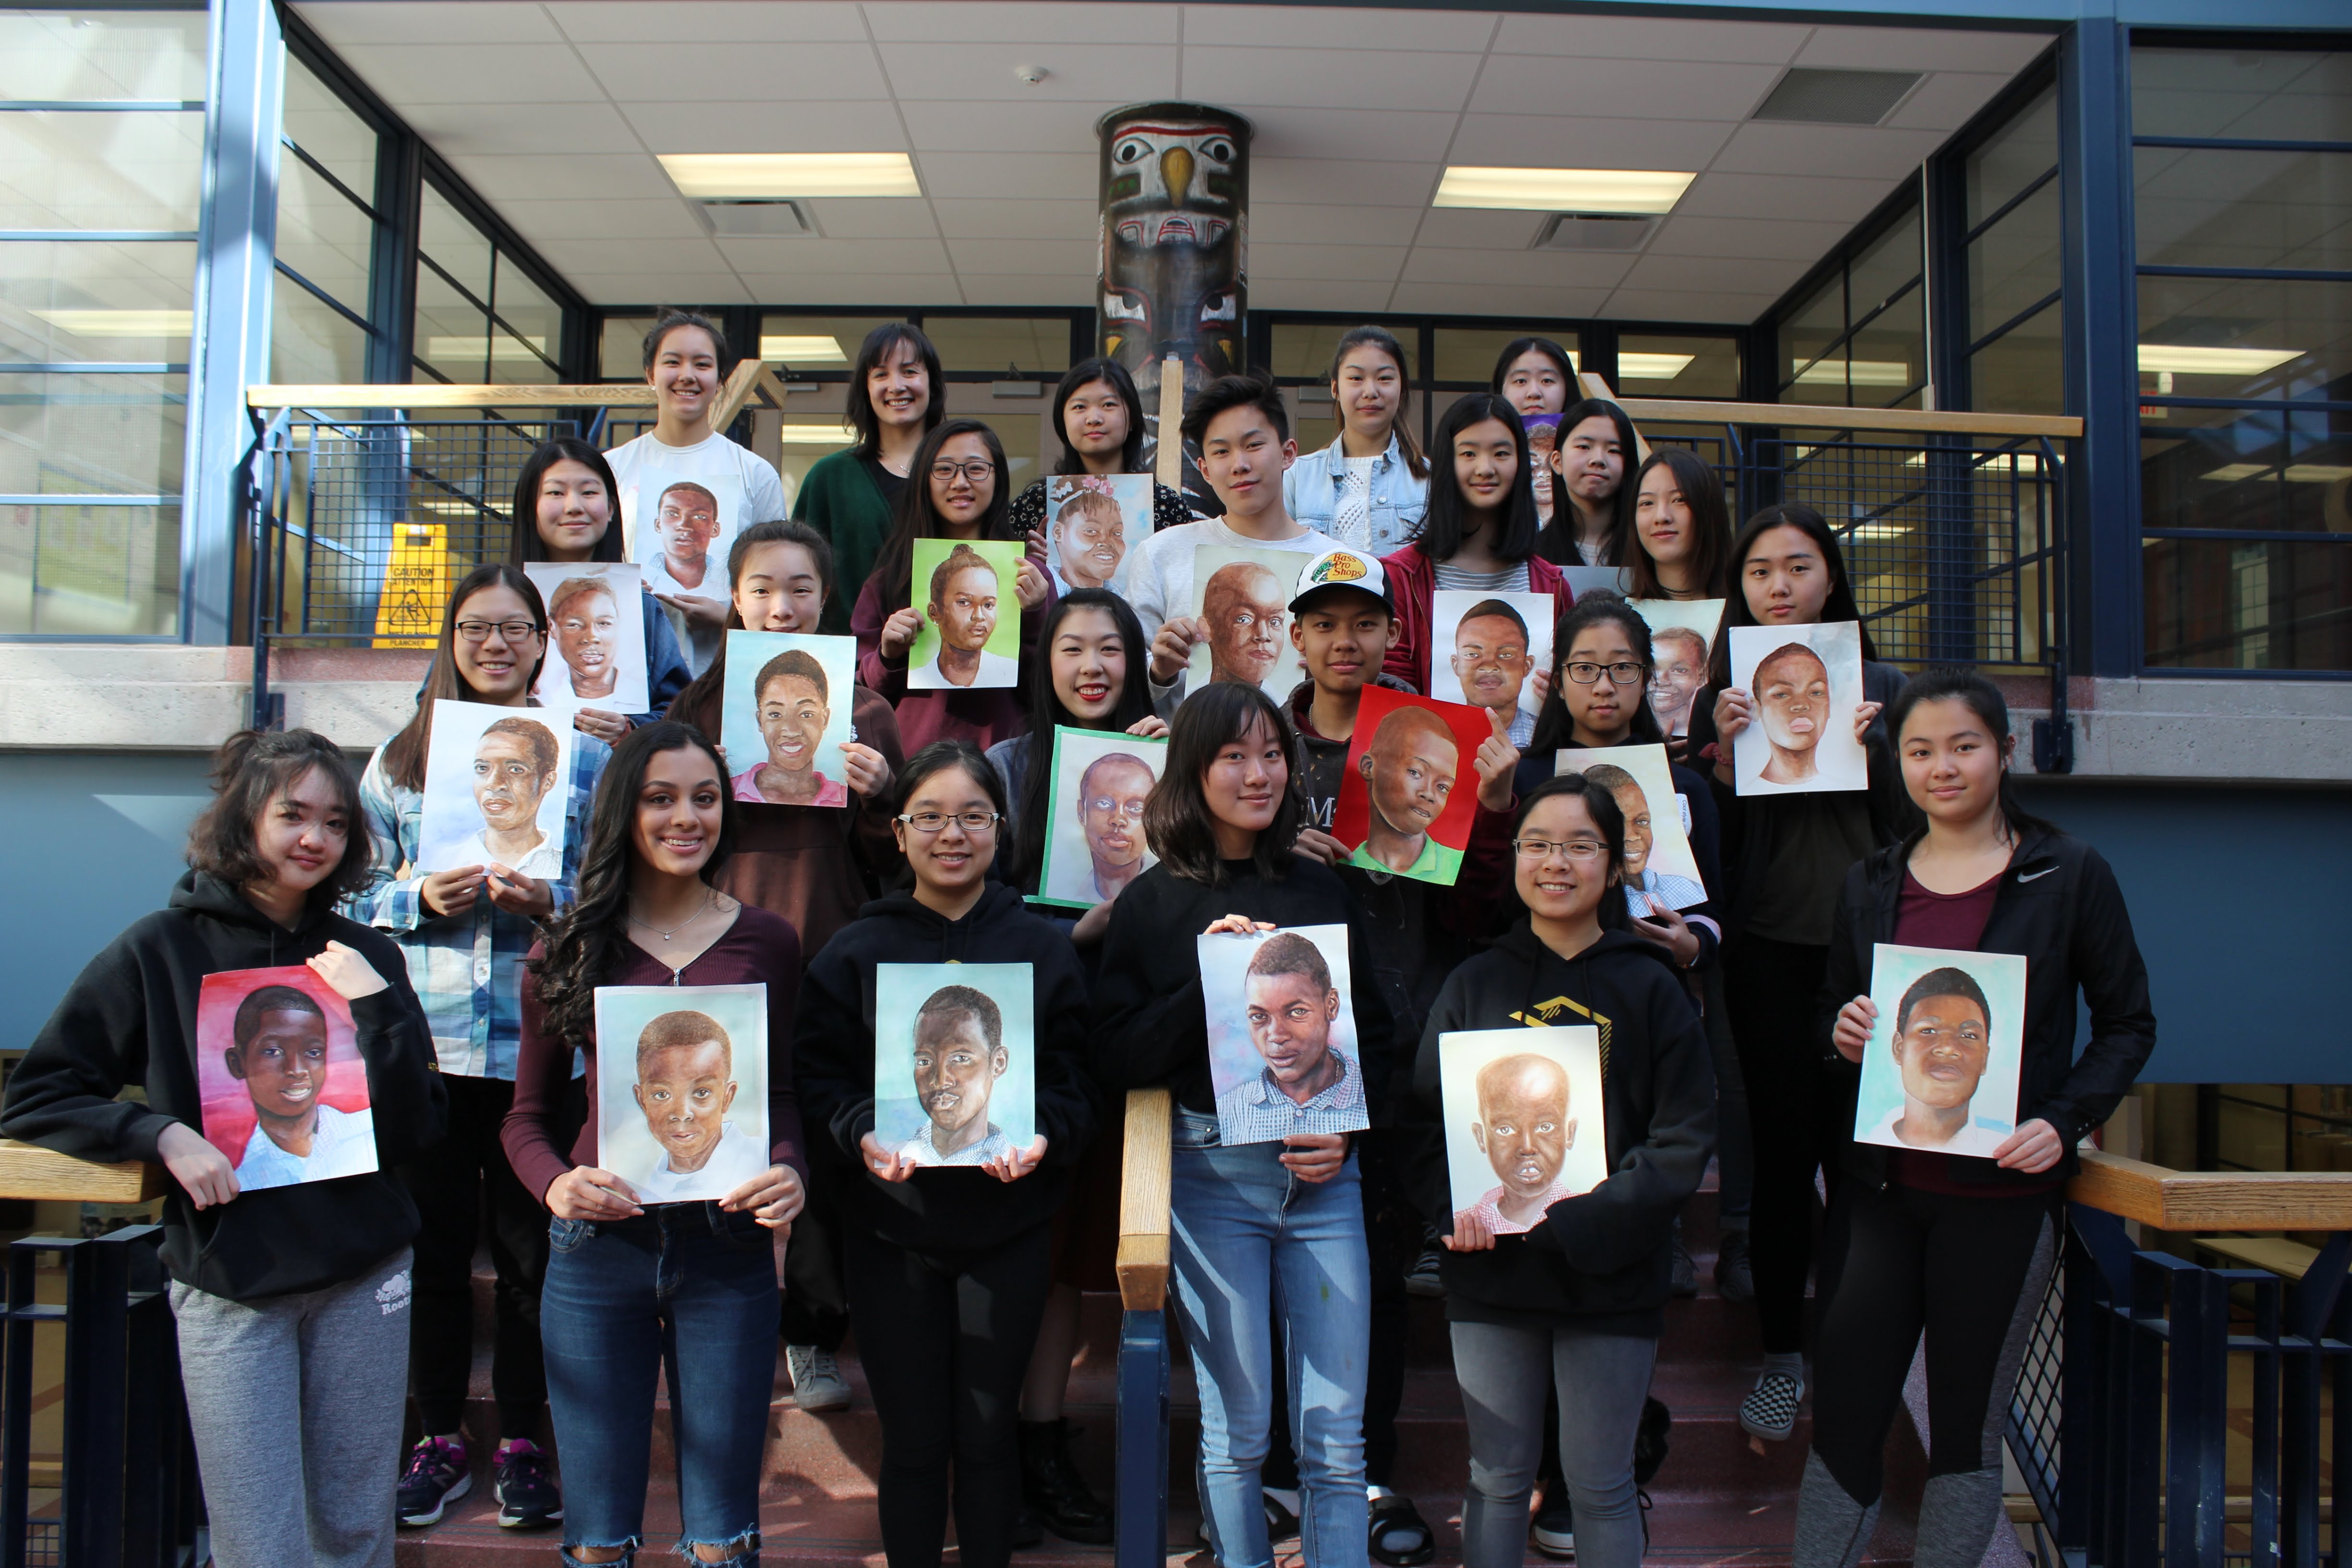 Students with the portraits they created